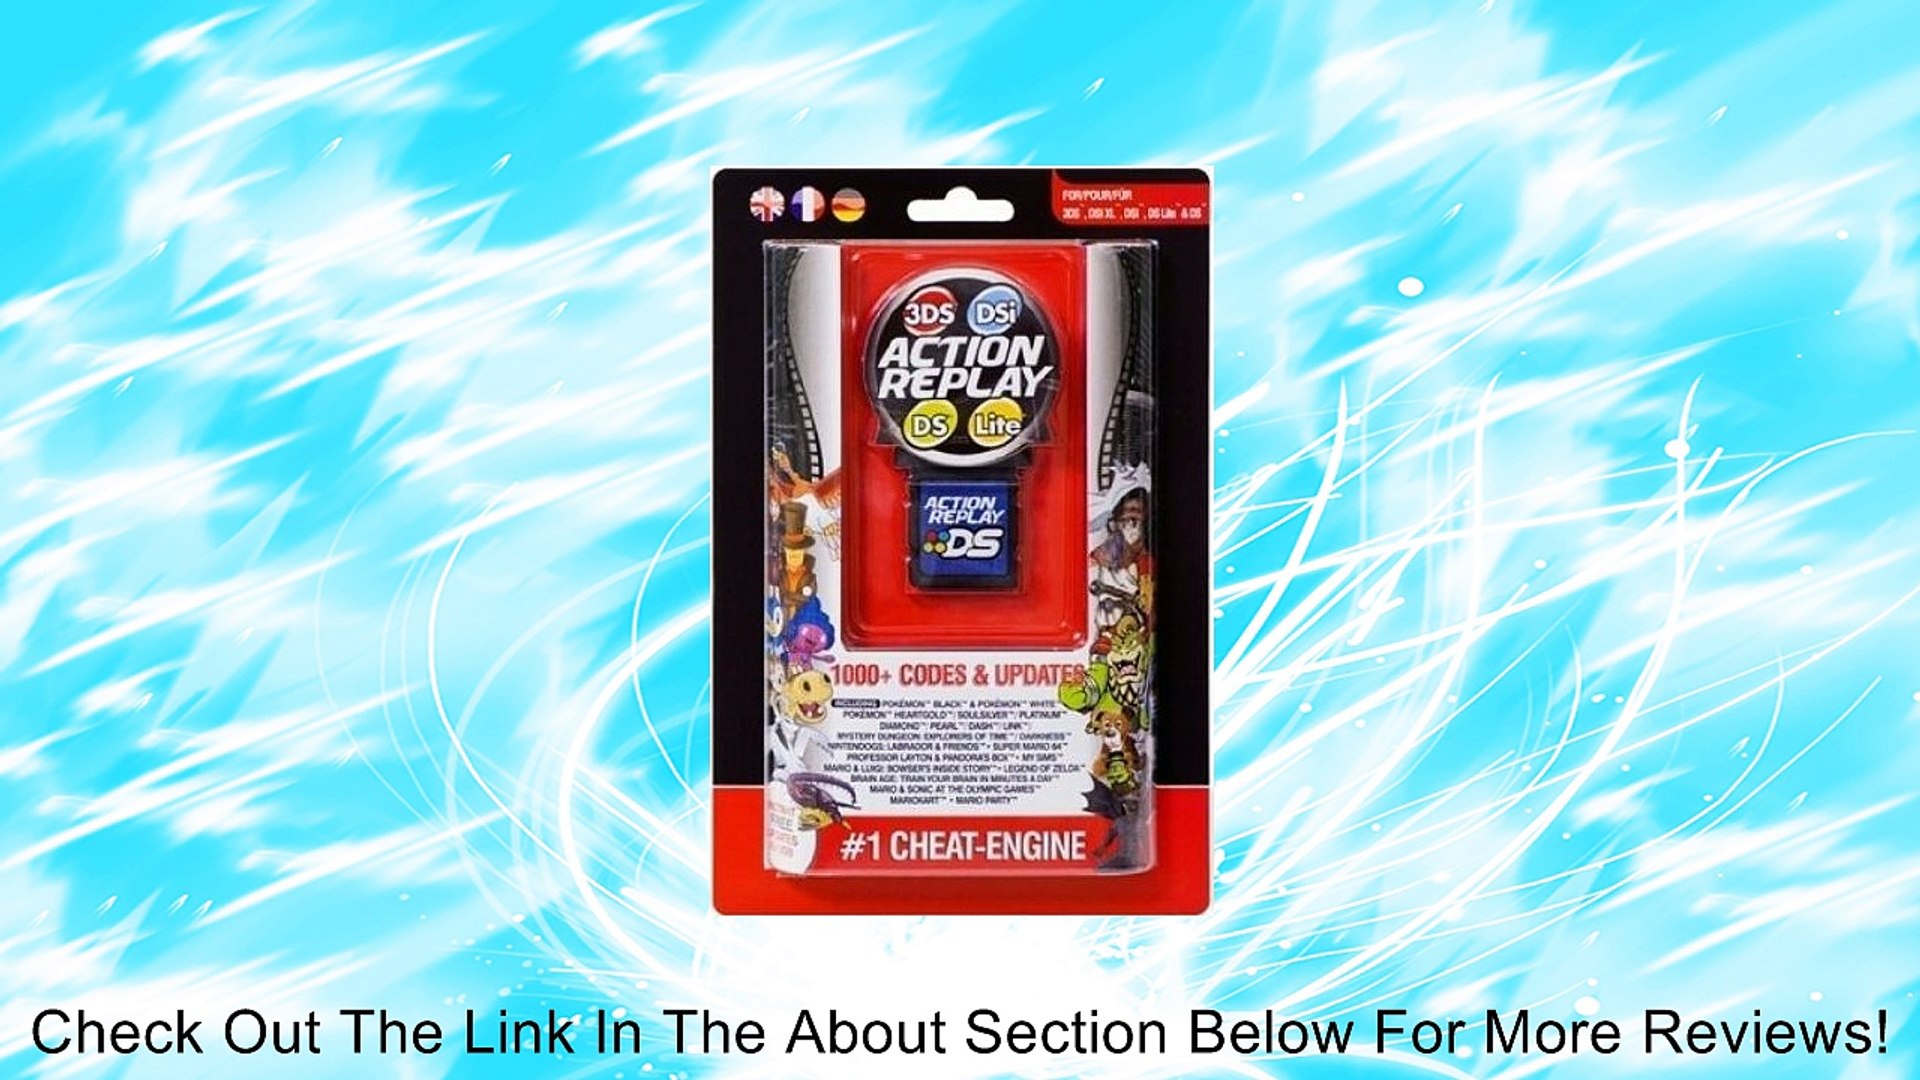 3ds cheat codes action replay